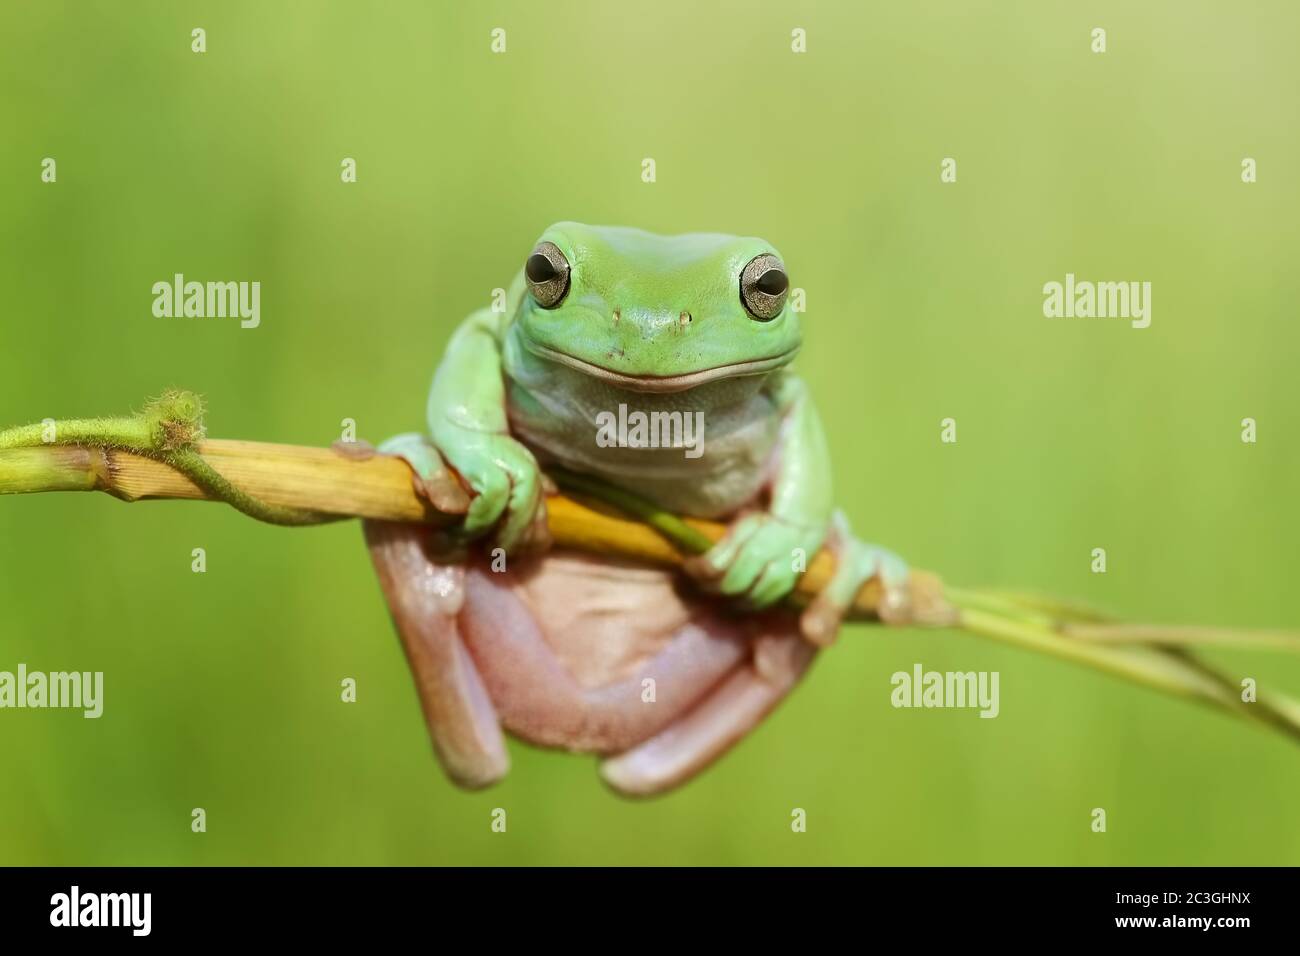 frogs, tree frogs, dumpy frogs in tree branches Stock Photo